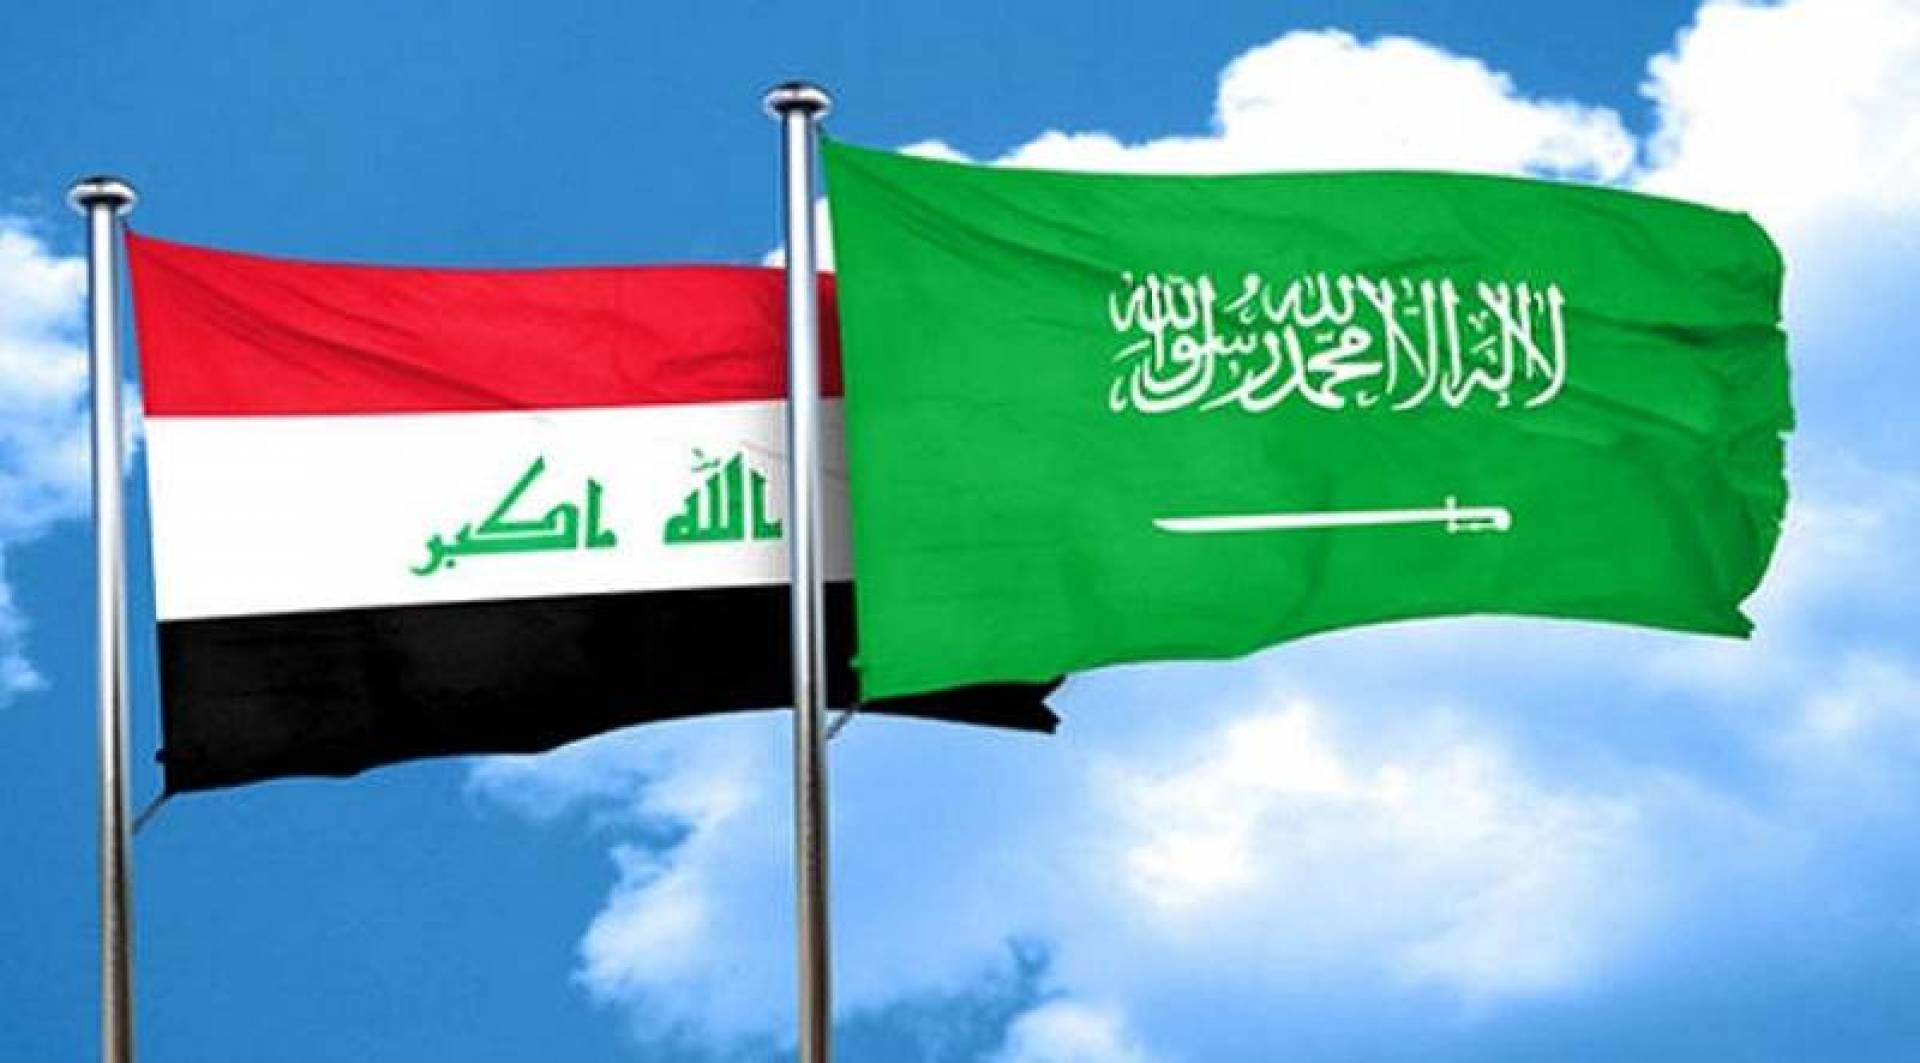 Iraq's Power Link with GCC Expected to Operate by End of 2025